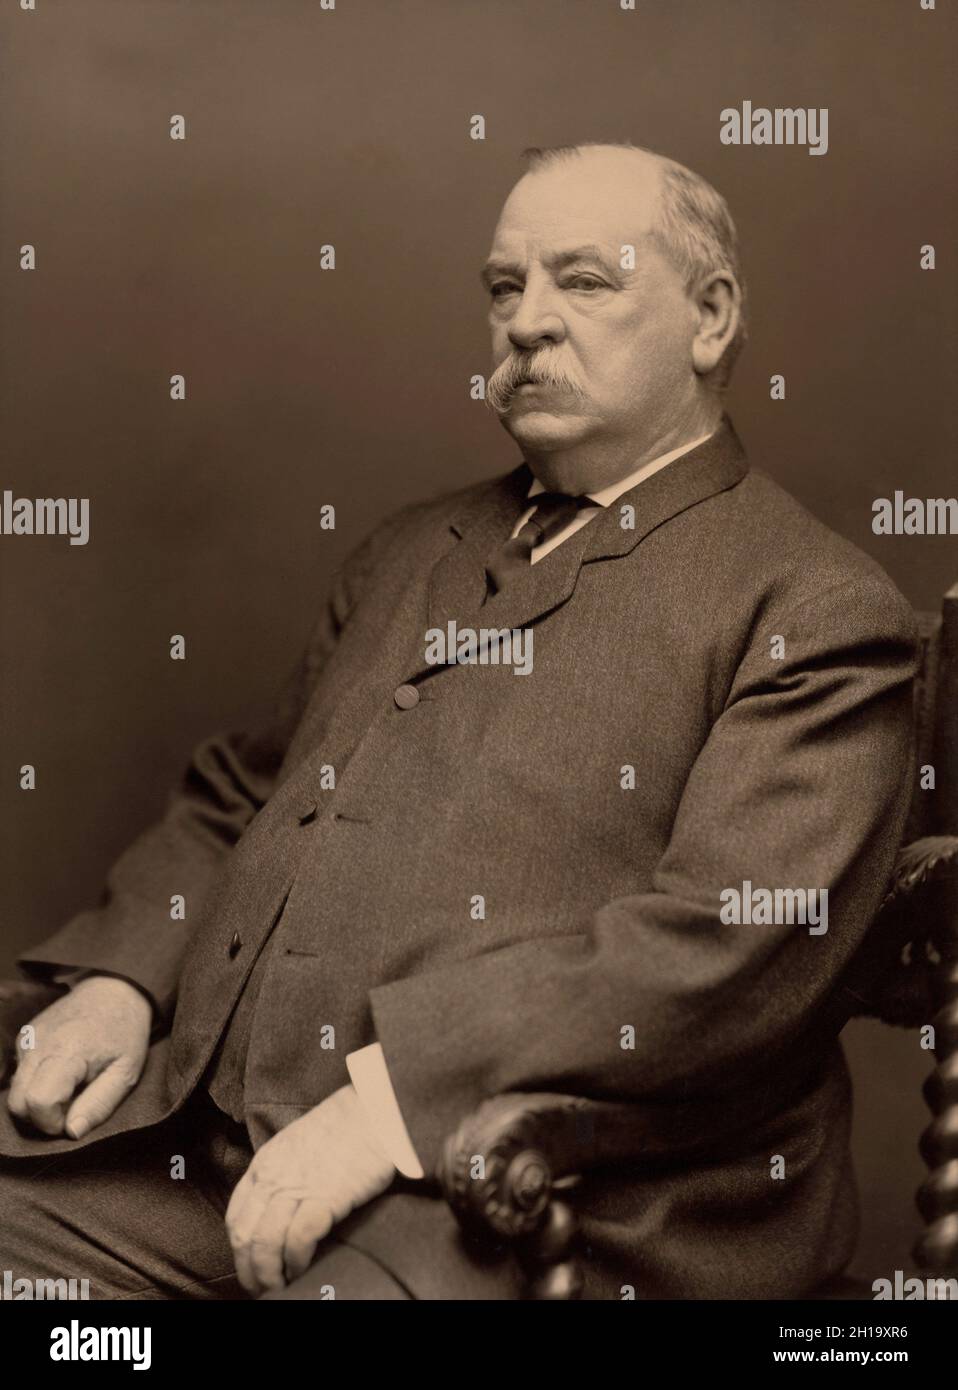 Grover Cleveland (1837-1908), 22nd and 24th U.S. President 1885-1889 and 1893-1897, Head and Shoulders Portrait, Pach Brothers Studio, 1907 Stock Photo